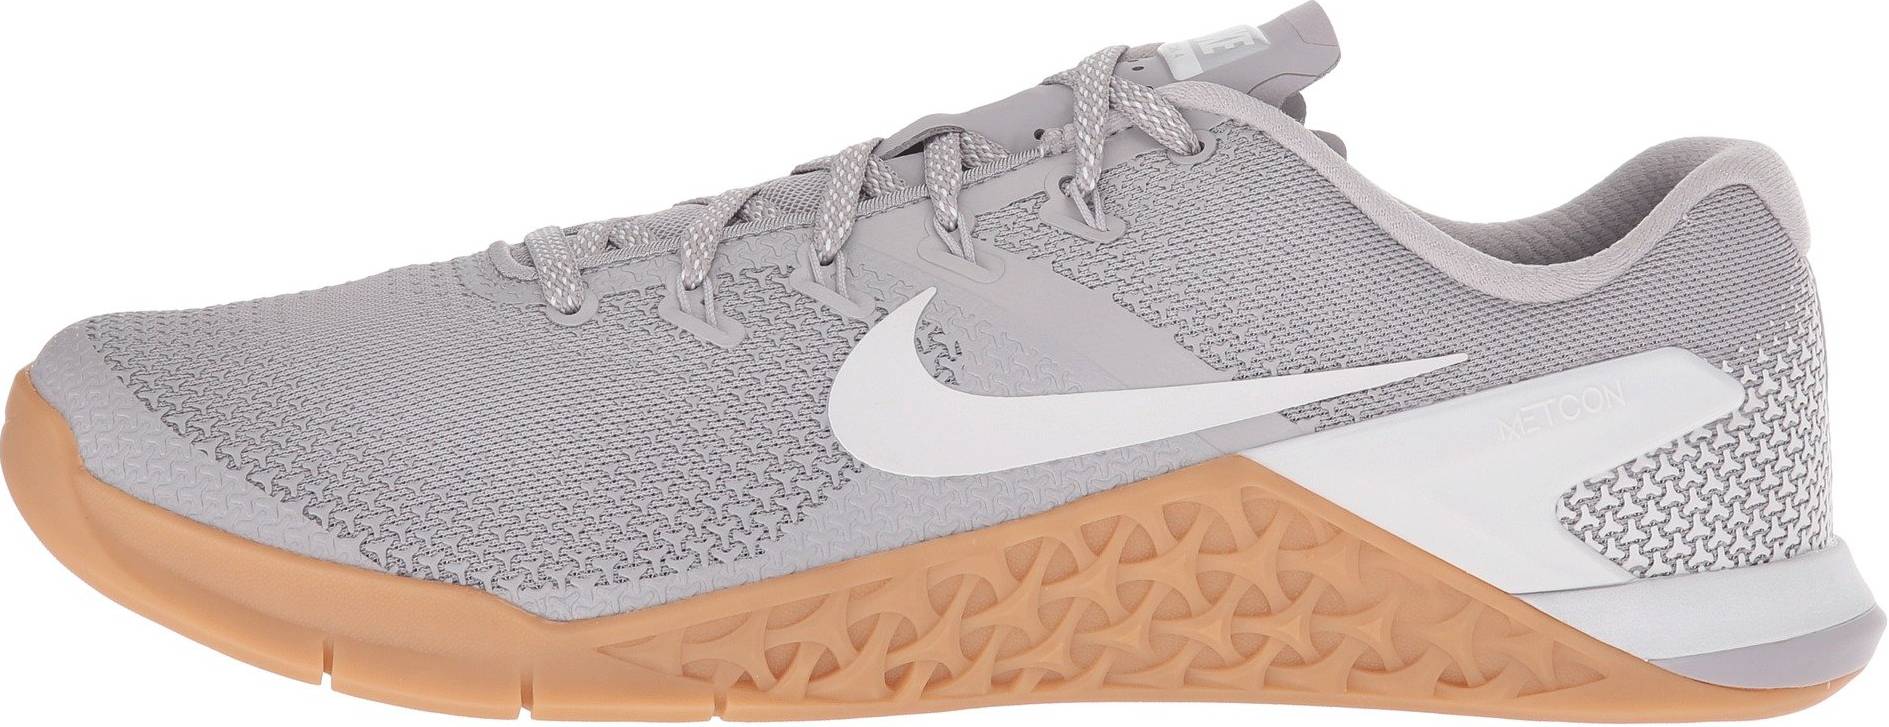 Save 46% on Grey Crossfit Shoes (28 